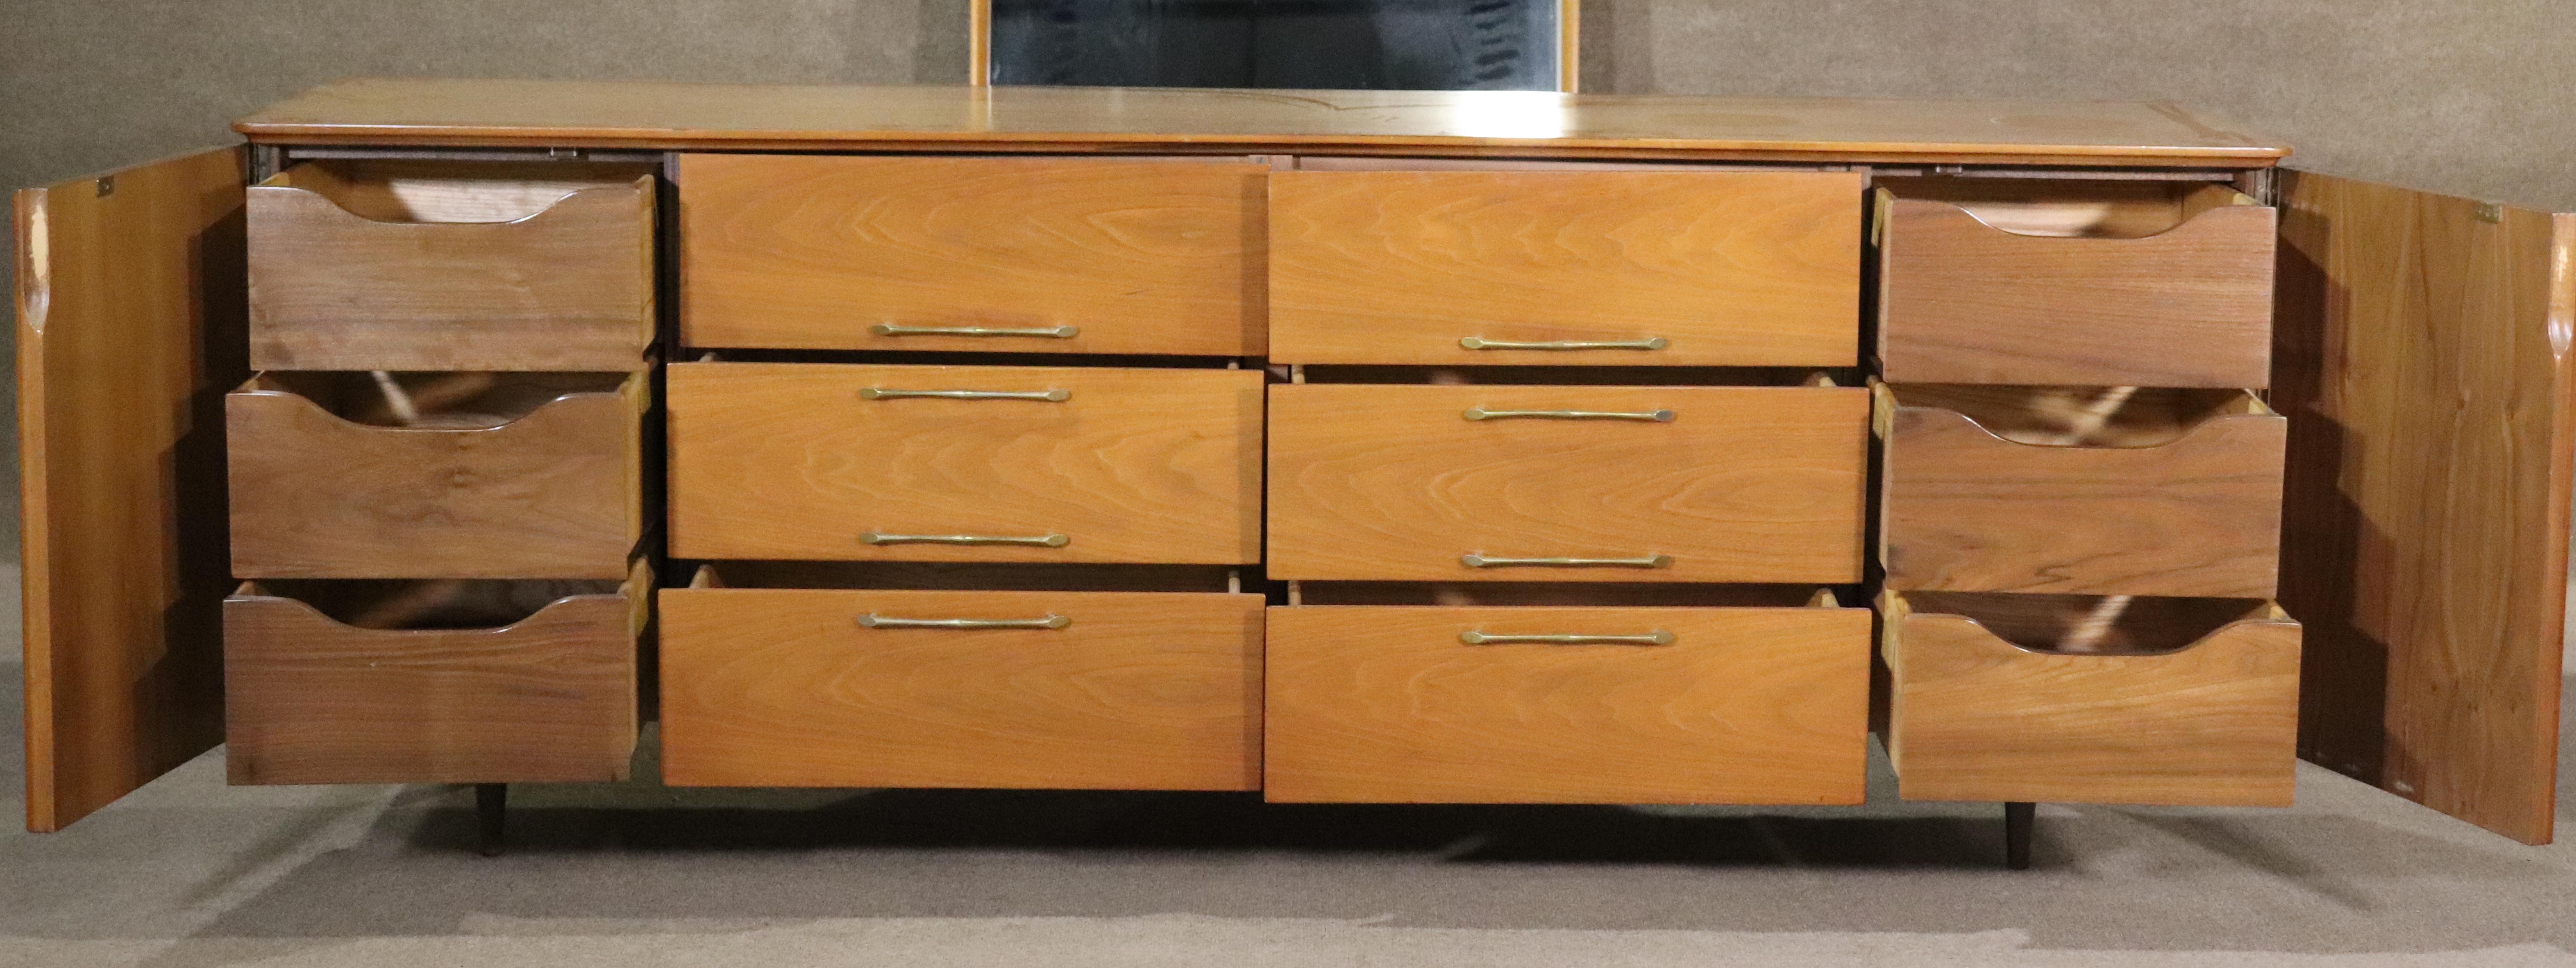 Long twelve drawer dresser in walnut with brass hardware. Sculpted doors, tapered feet and a cut out top. Mirror is included.
Mirror: 31.25h, 49.25w
Please confirm location NY or NJ